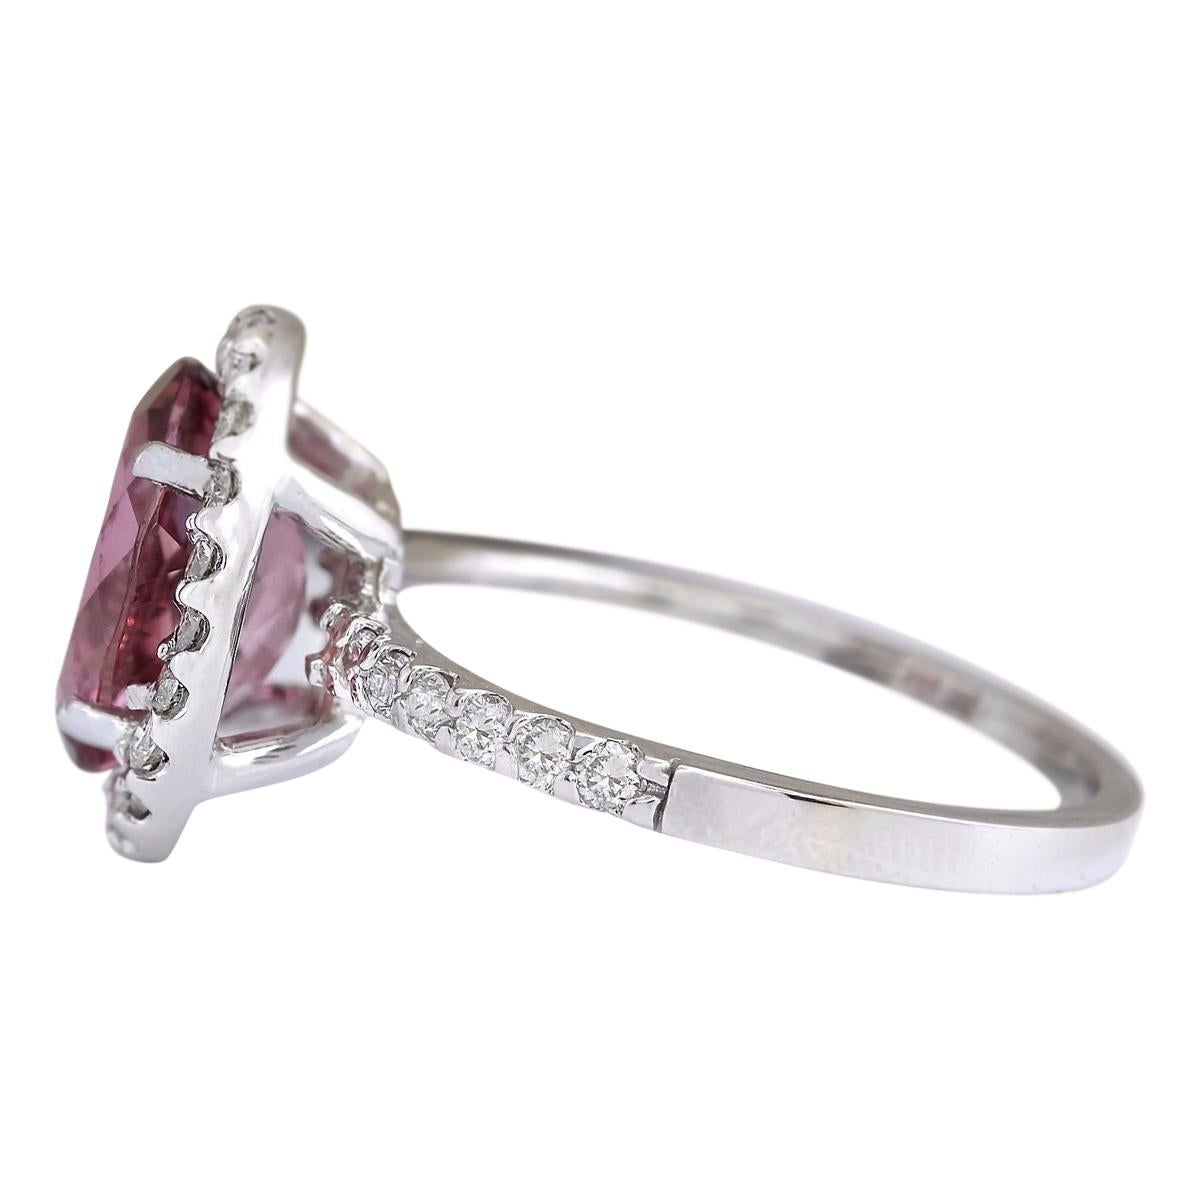 Stamped: 14K White Gold
Total Ring Weight: 3.2 Grams
Total Natural Tourmaline Weight is 2.42 Carat (Measures: 10.00x8.00 mm)
Color: Pink
Total Natural Diamond Weight is 0.60 Carat
Color: F-G, Clarity: VS2-SI1
Face Measures: 13.60x11.50 mm
Sku: